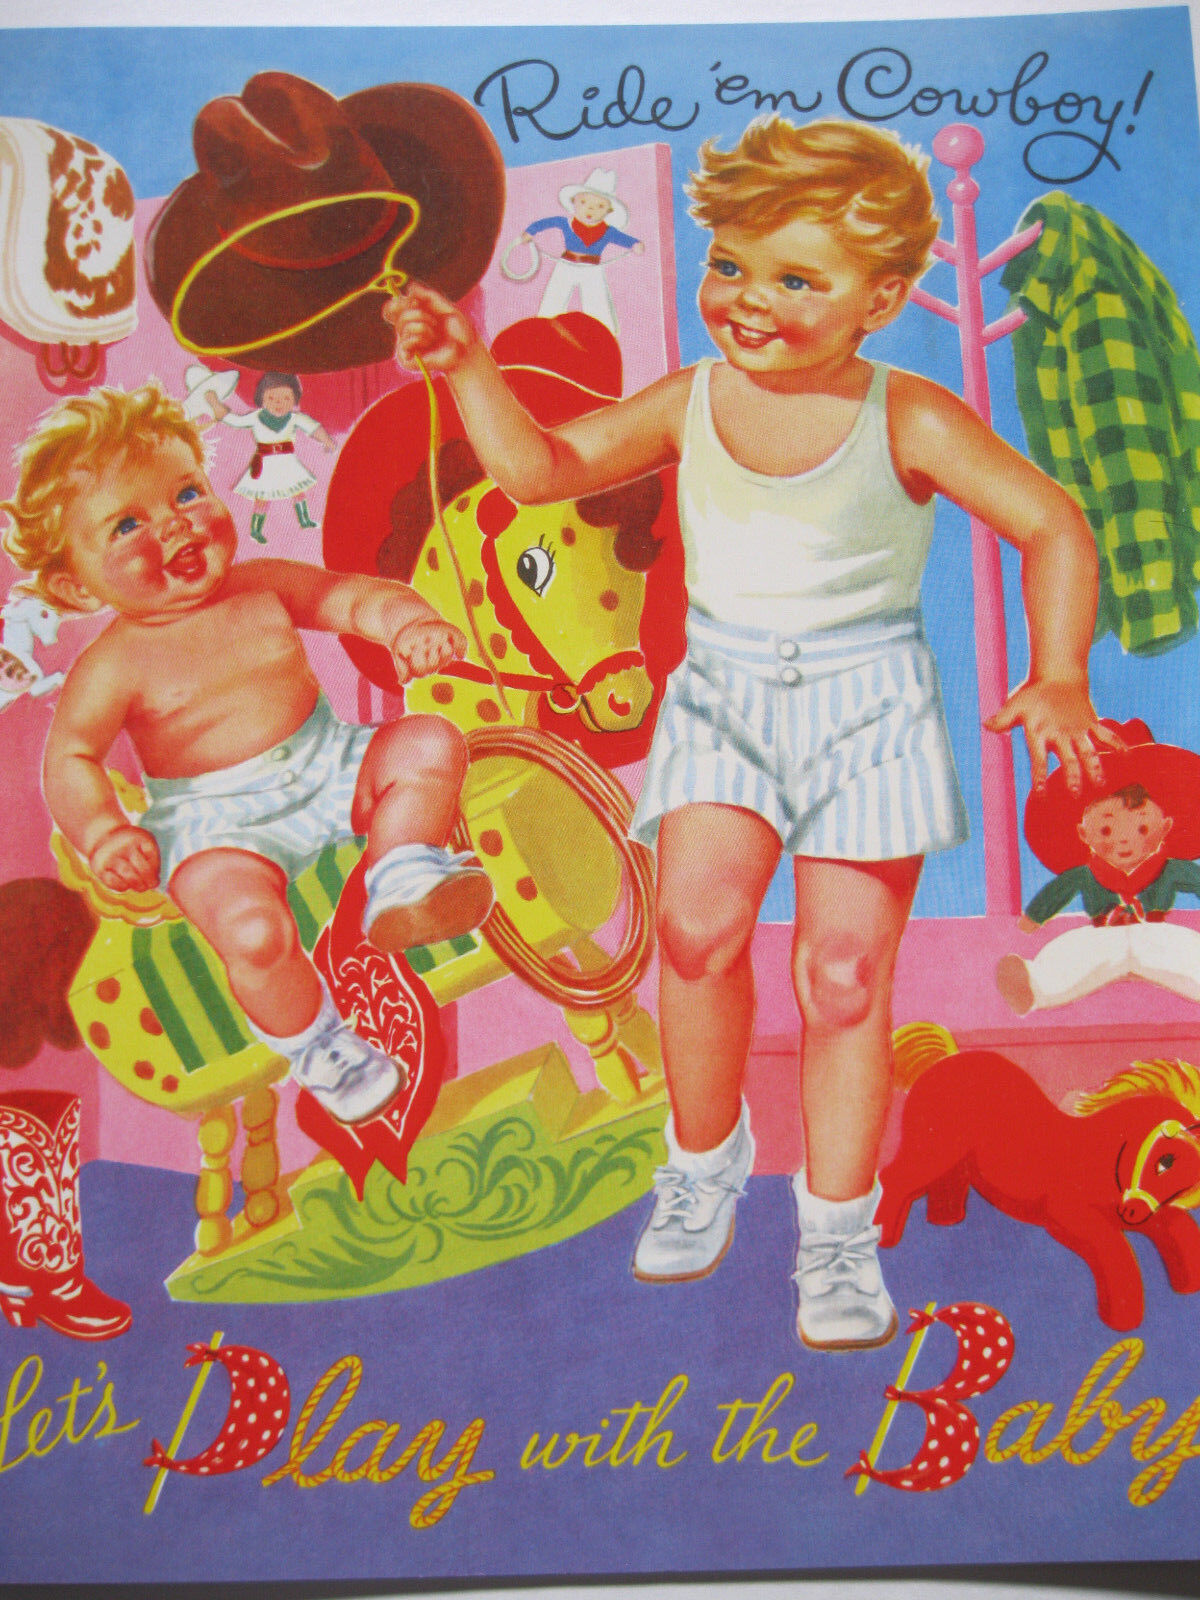 LET'S PLAY WITH THE BABY - Super Sweet Vintage Reproduction Pape